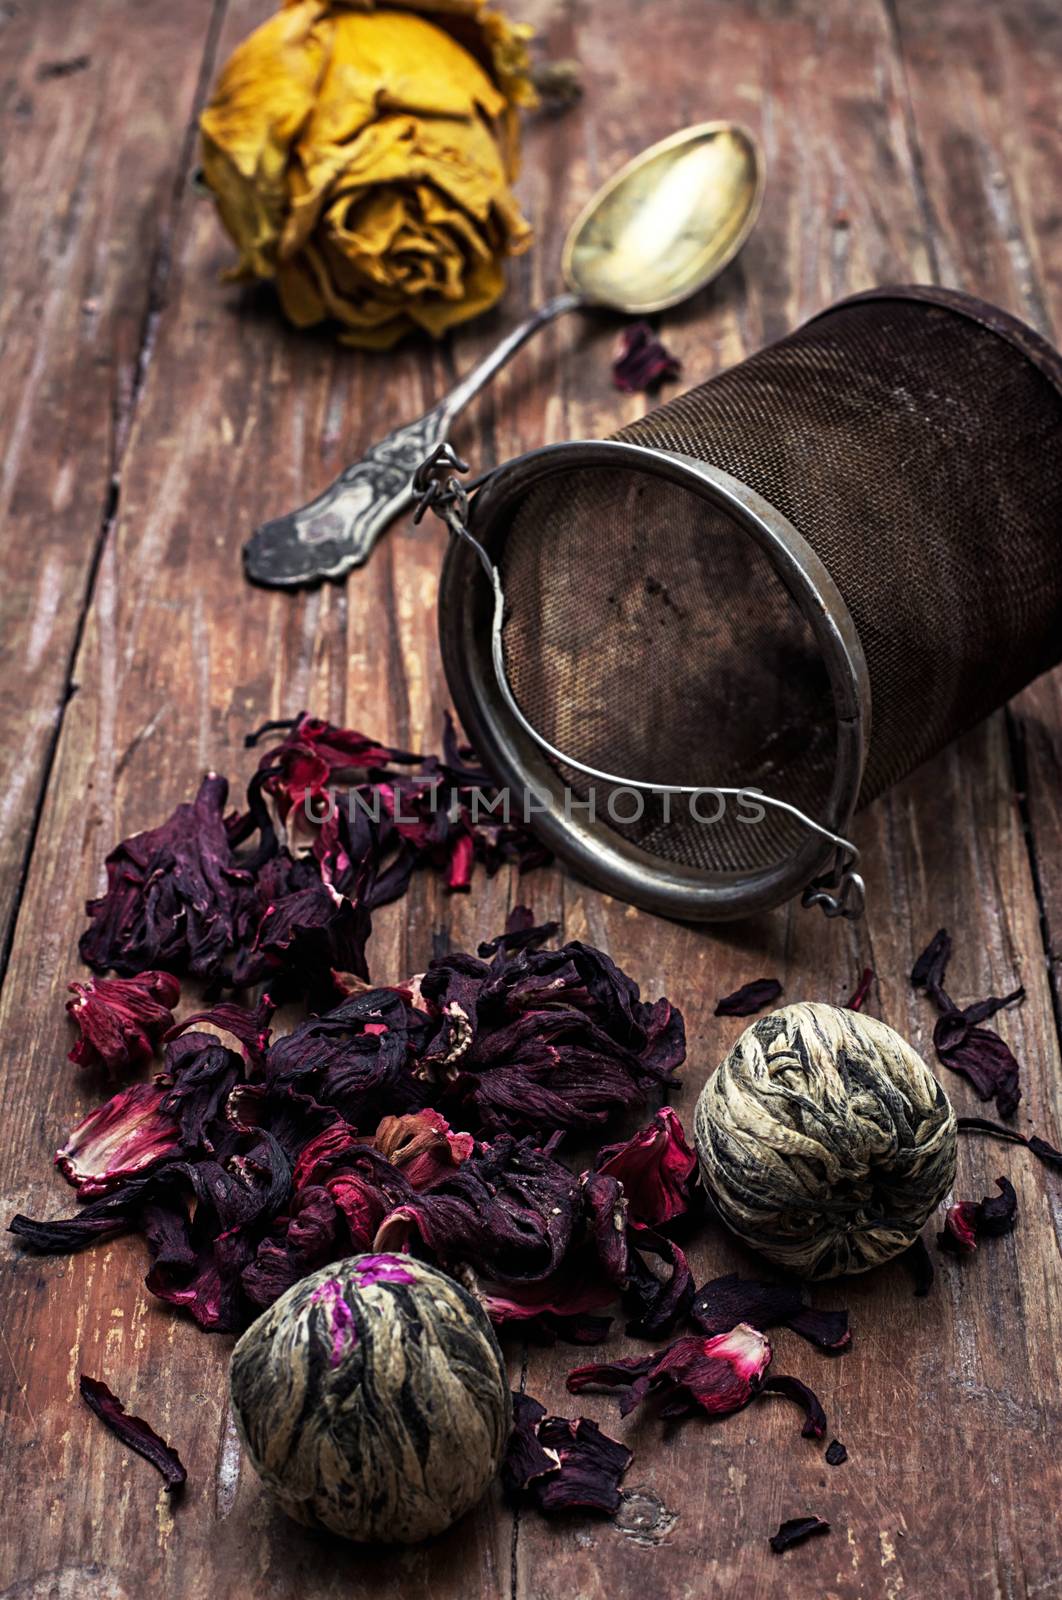 tea strainer and different varieties of tea leaves on wooden background.The toned image